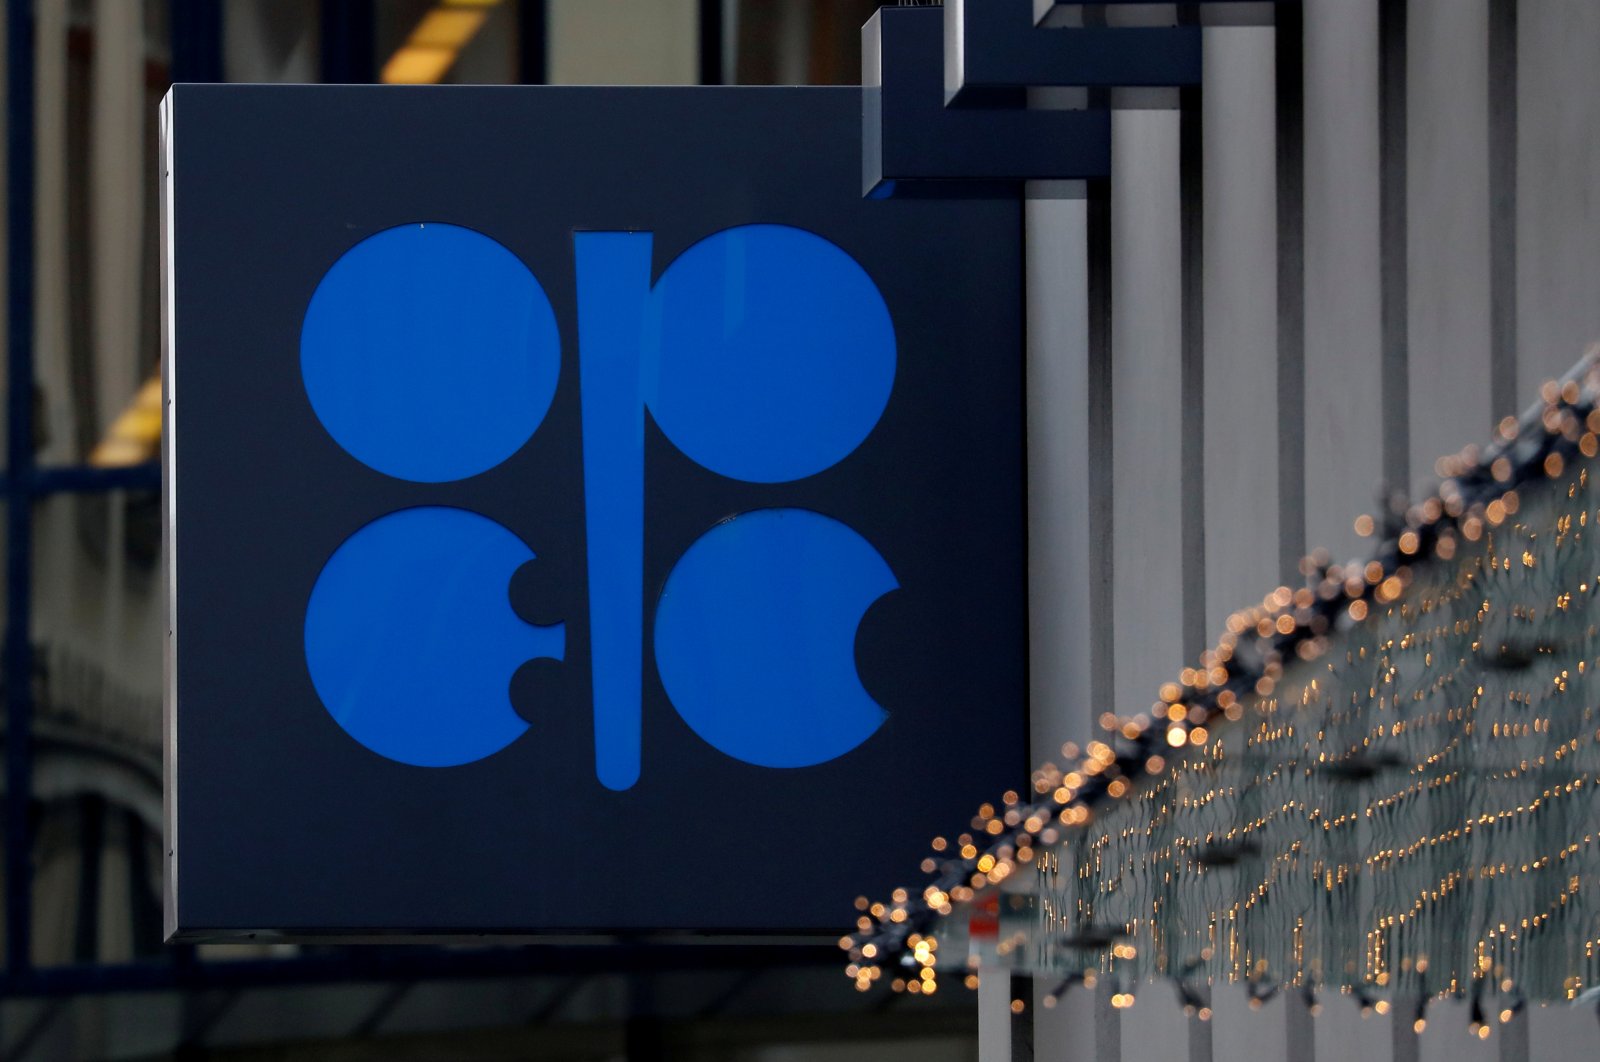 The logo of the Organization of the Petroleum Exporting Countries (OPEC) sits outside its headquarters ahead of a meeting between OPEC members and non-OPEC countries, Vienna, Austria, Dec. 6, 2019. (Reuters Photo)